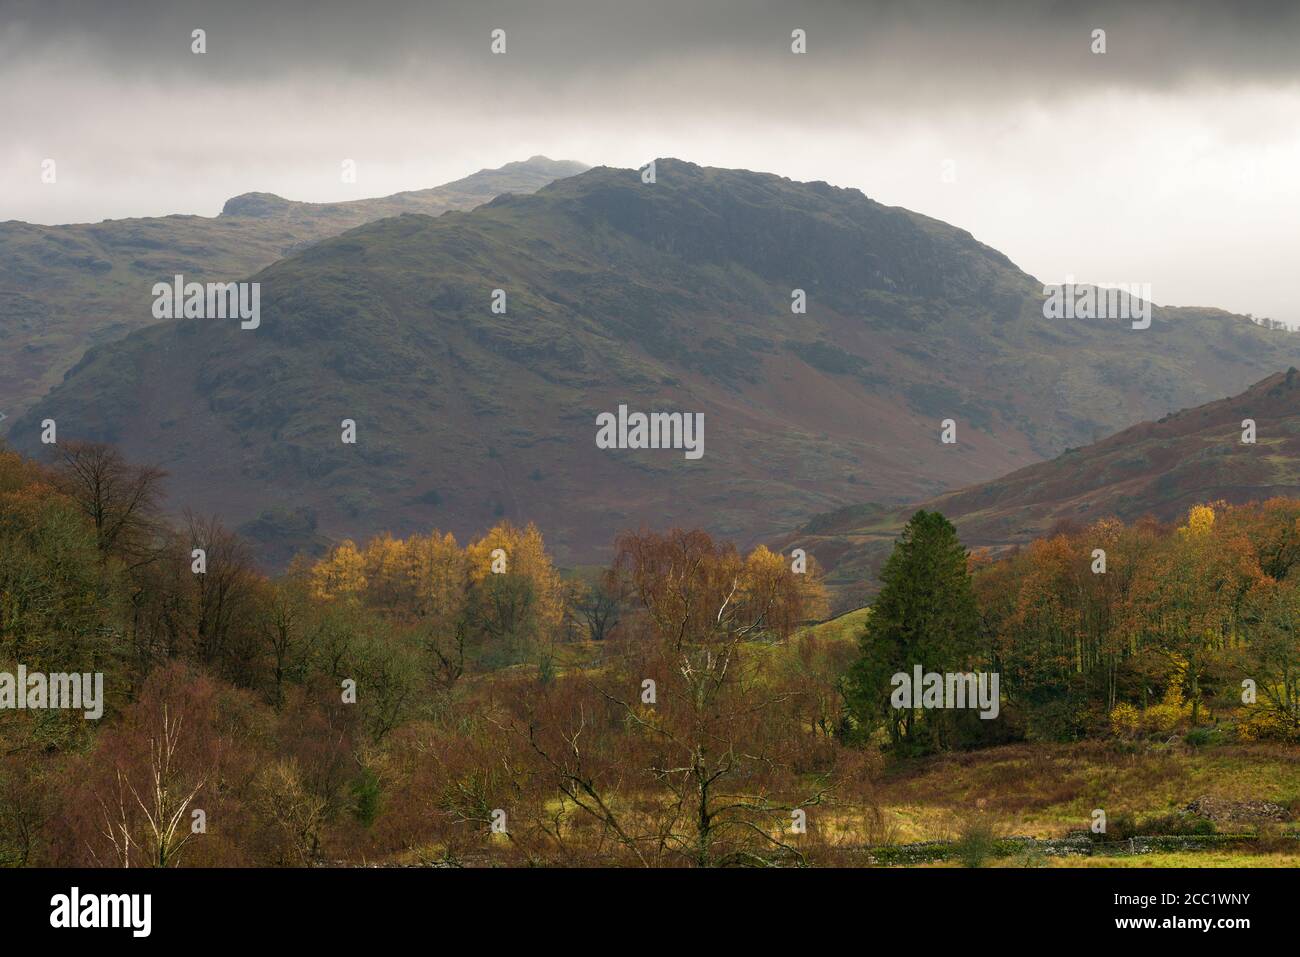 Wrynose Fell viewed from across the Little Langdale valley in the Lake District National Park, Cumbria, England. Stock Photo